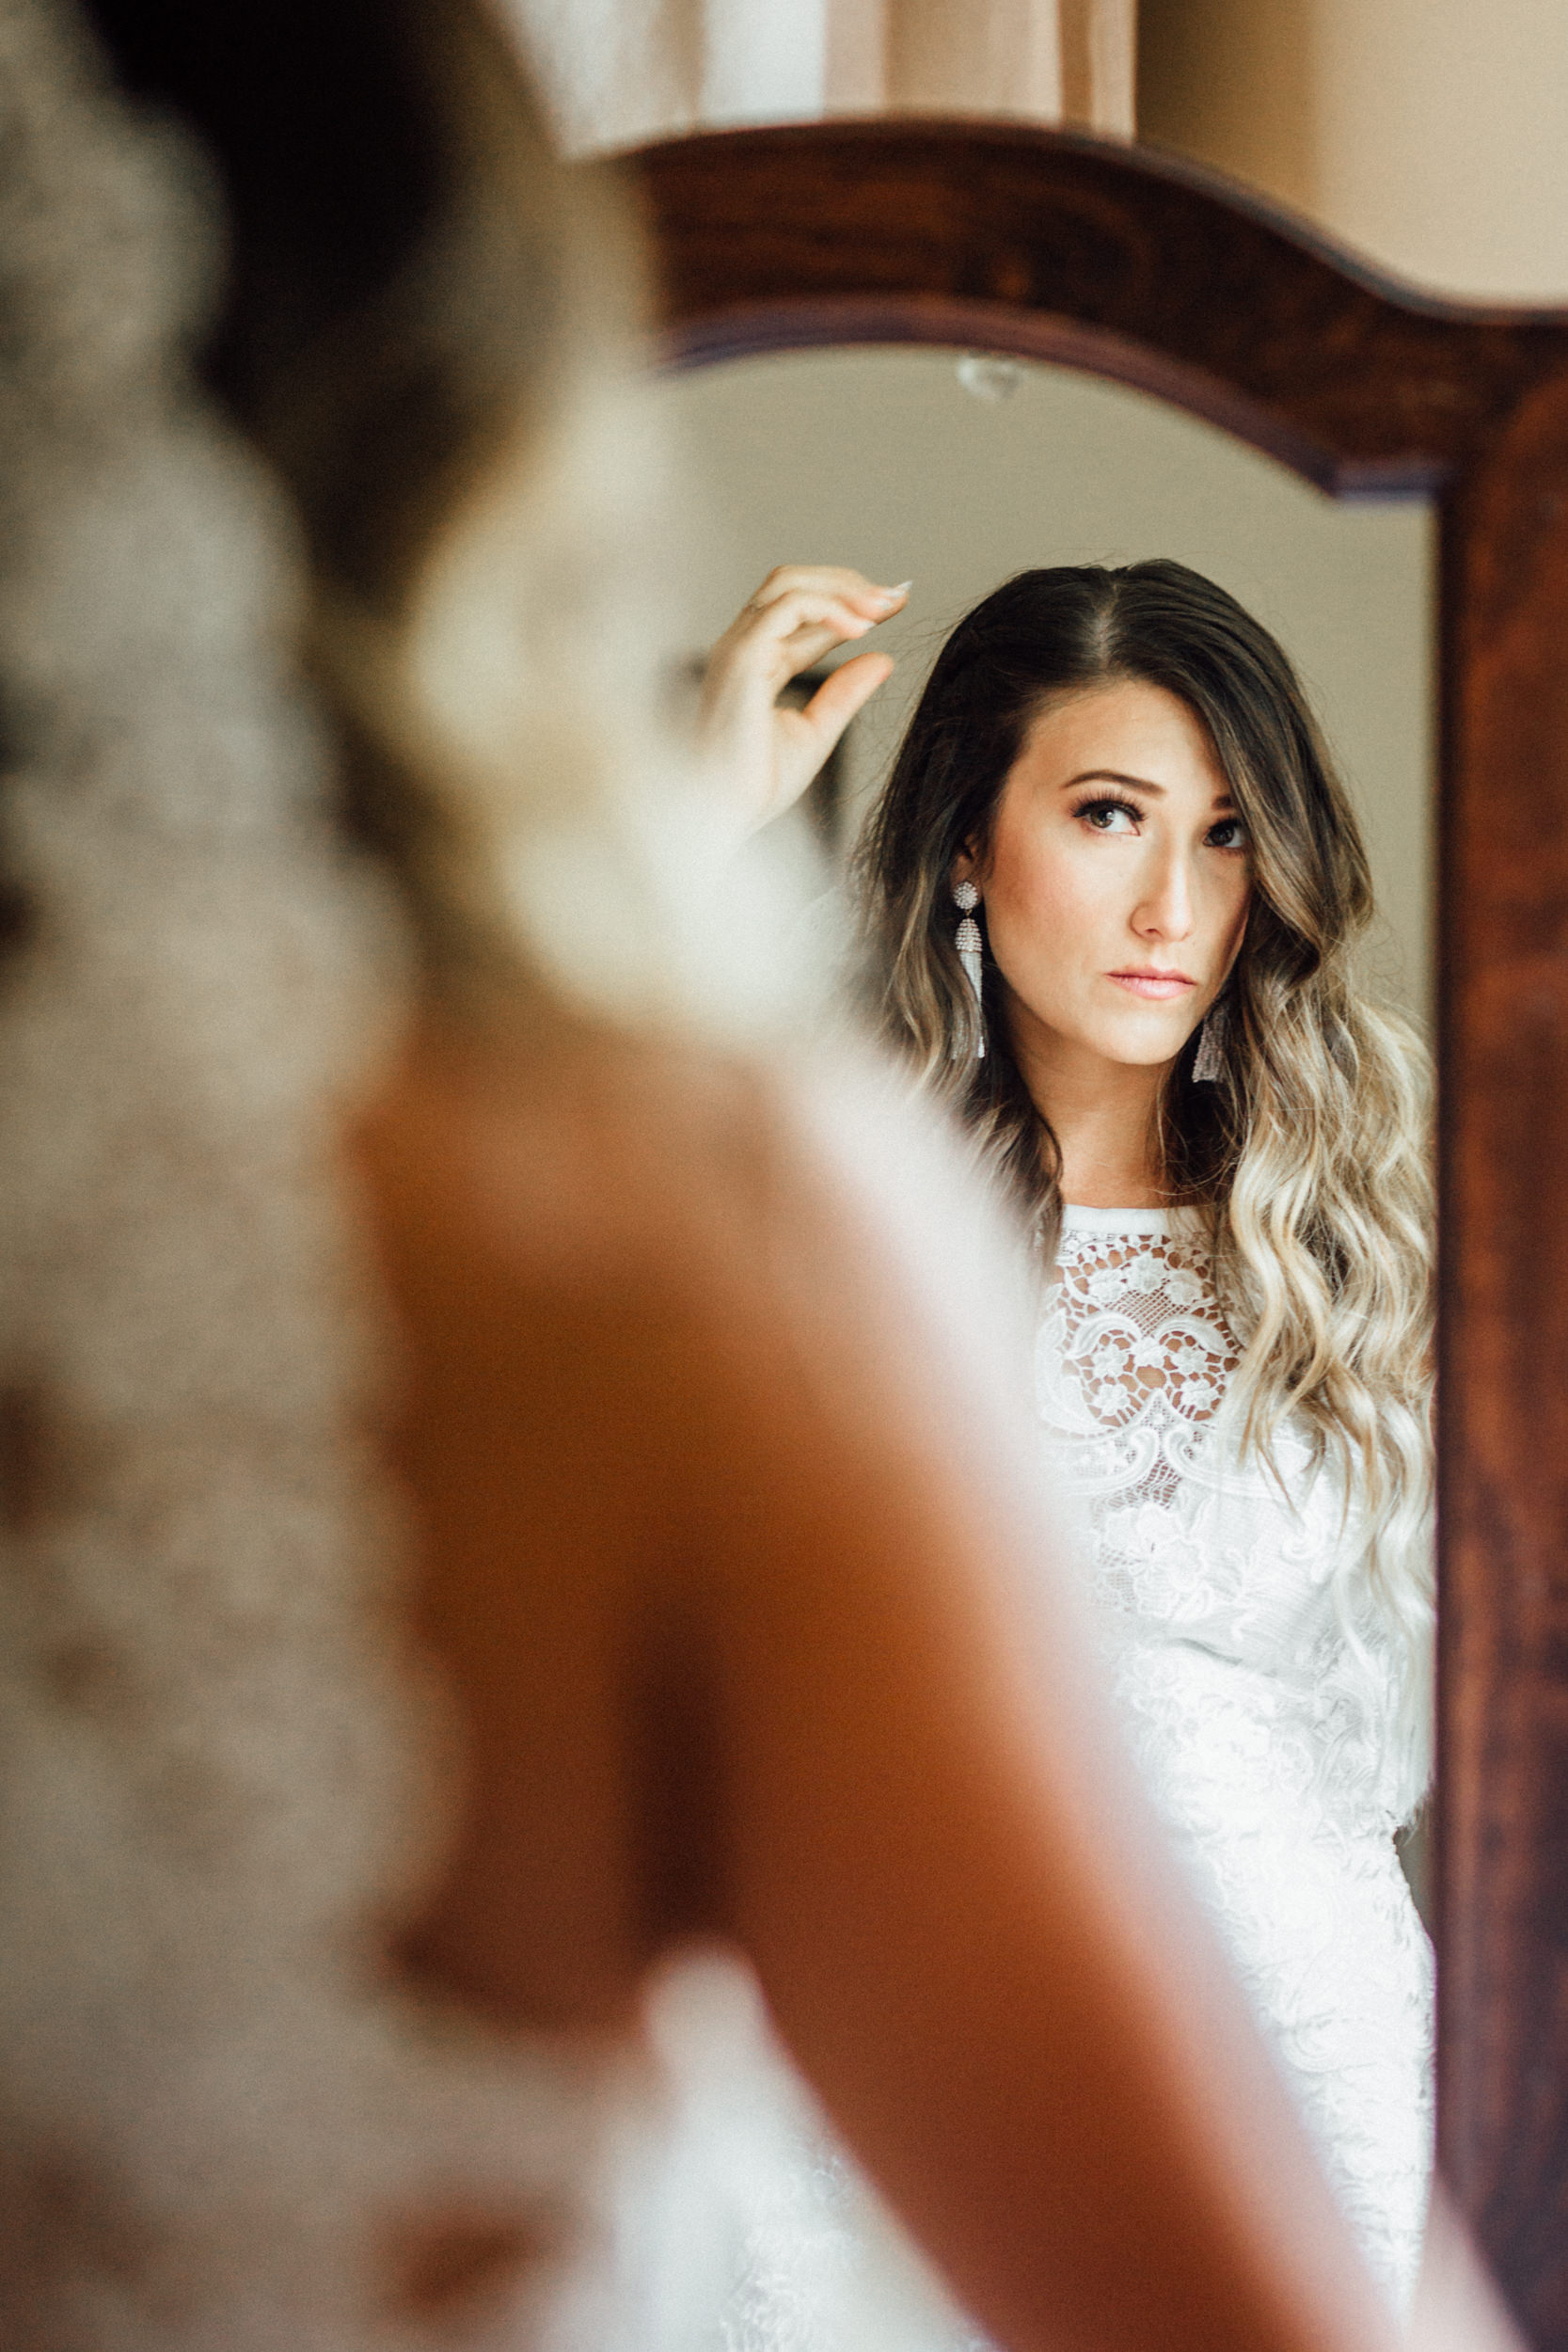 AK bride getting ready in front of antique mirror